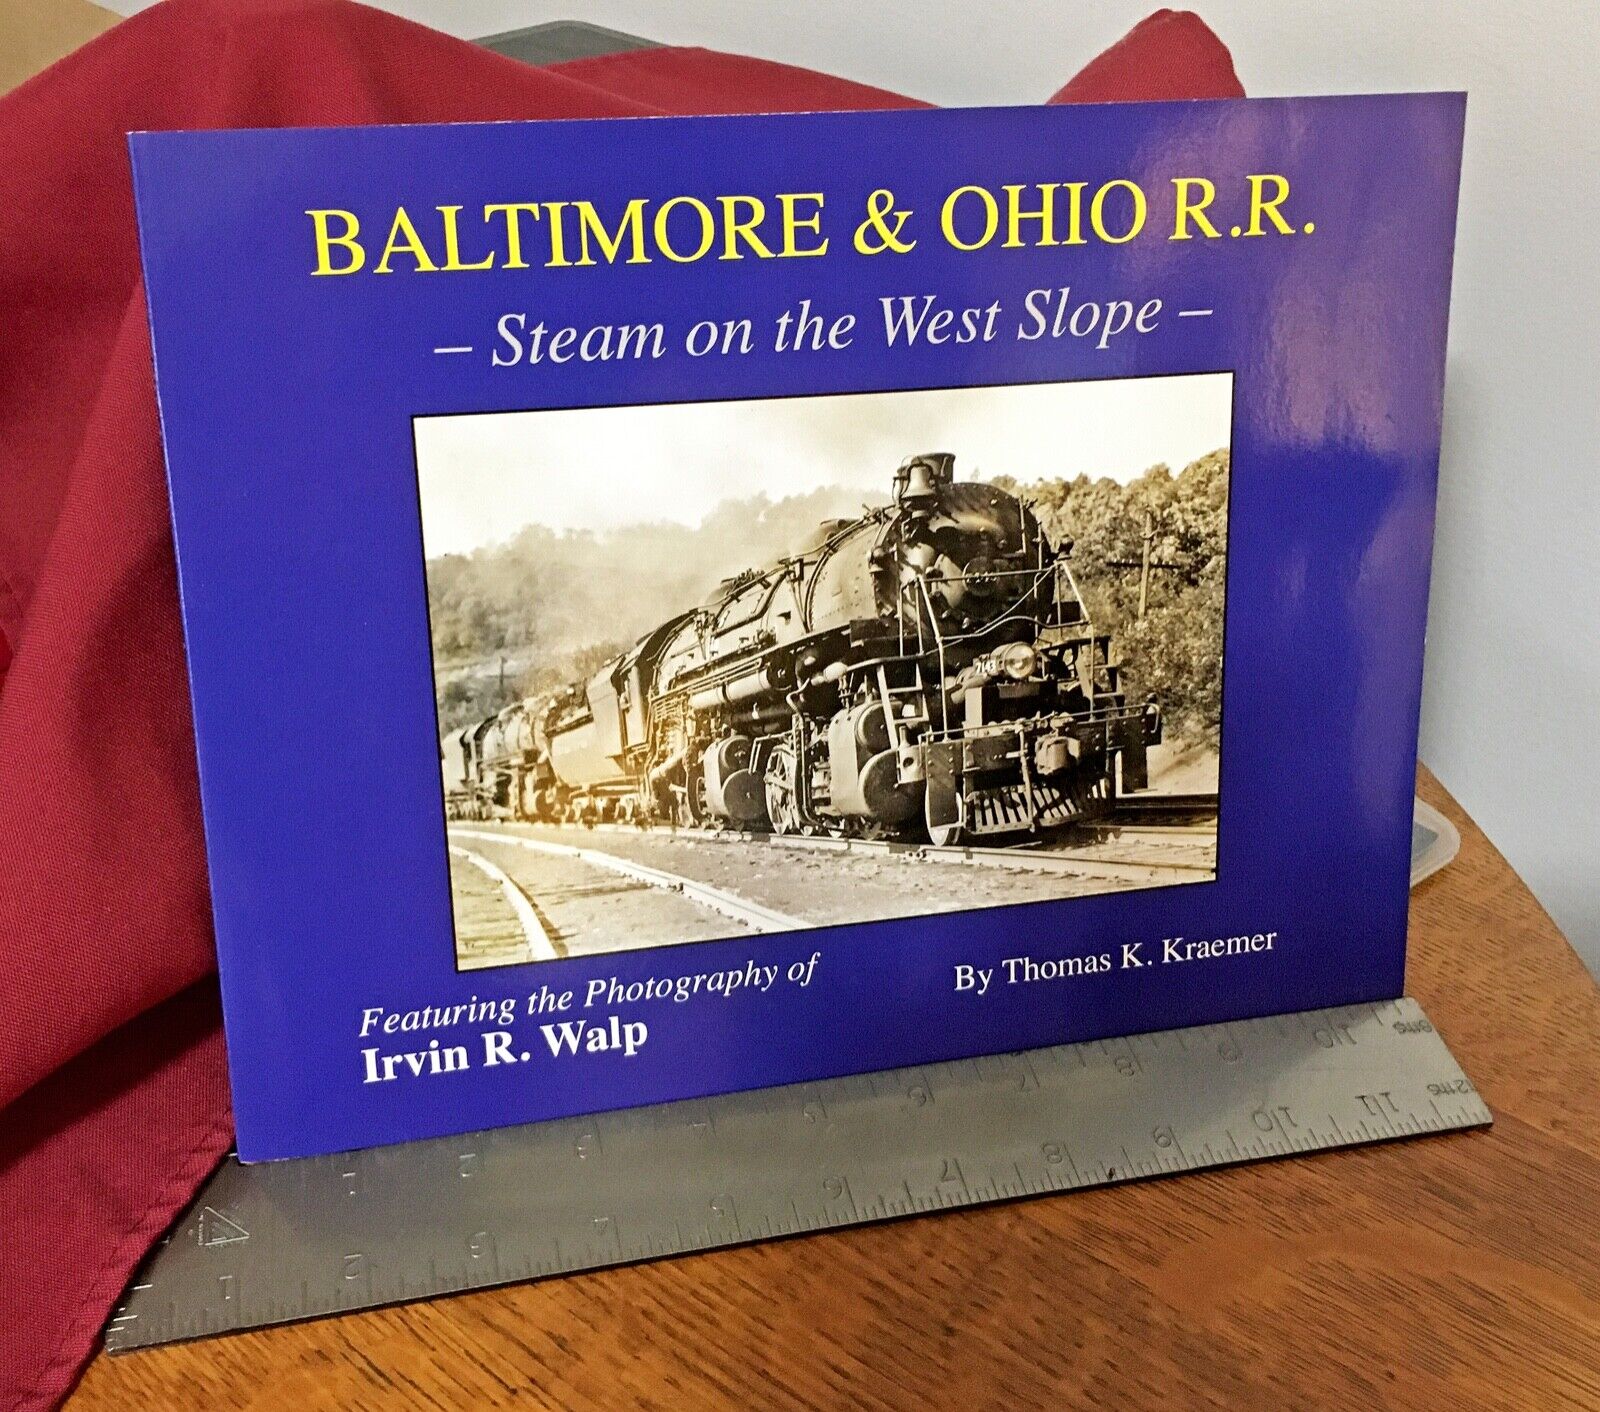 BALTIMORE & OHIO R.R. Steam on the West Slope